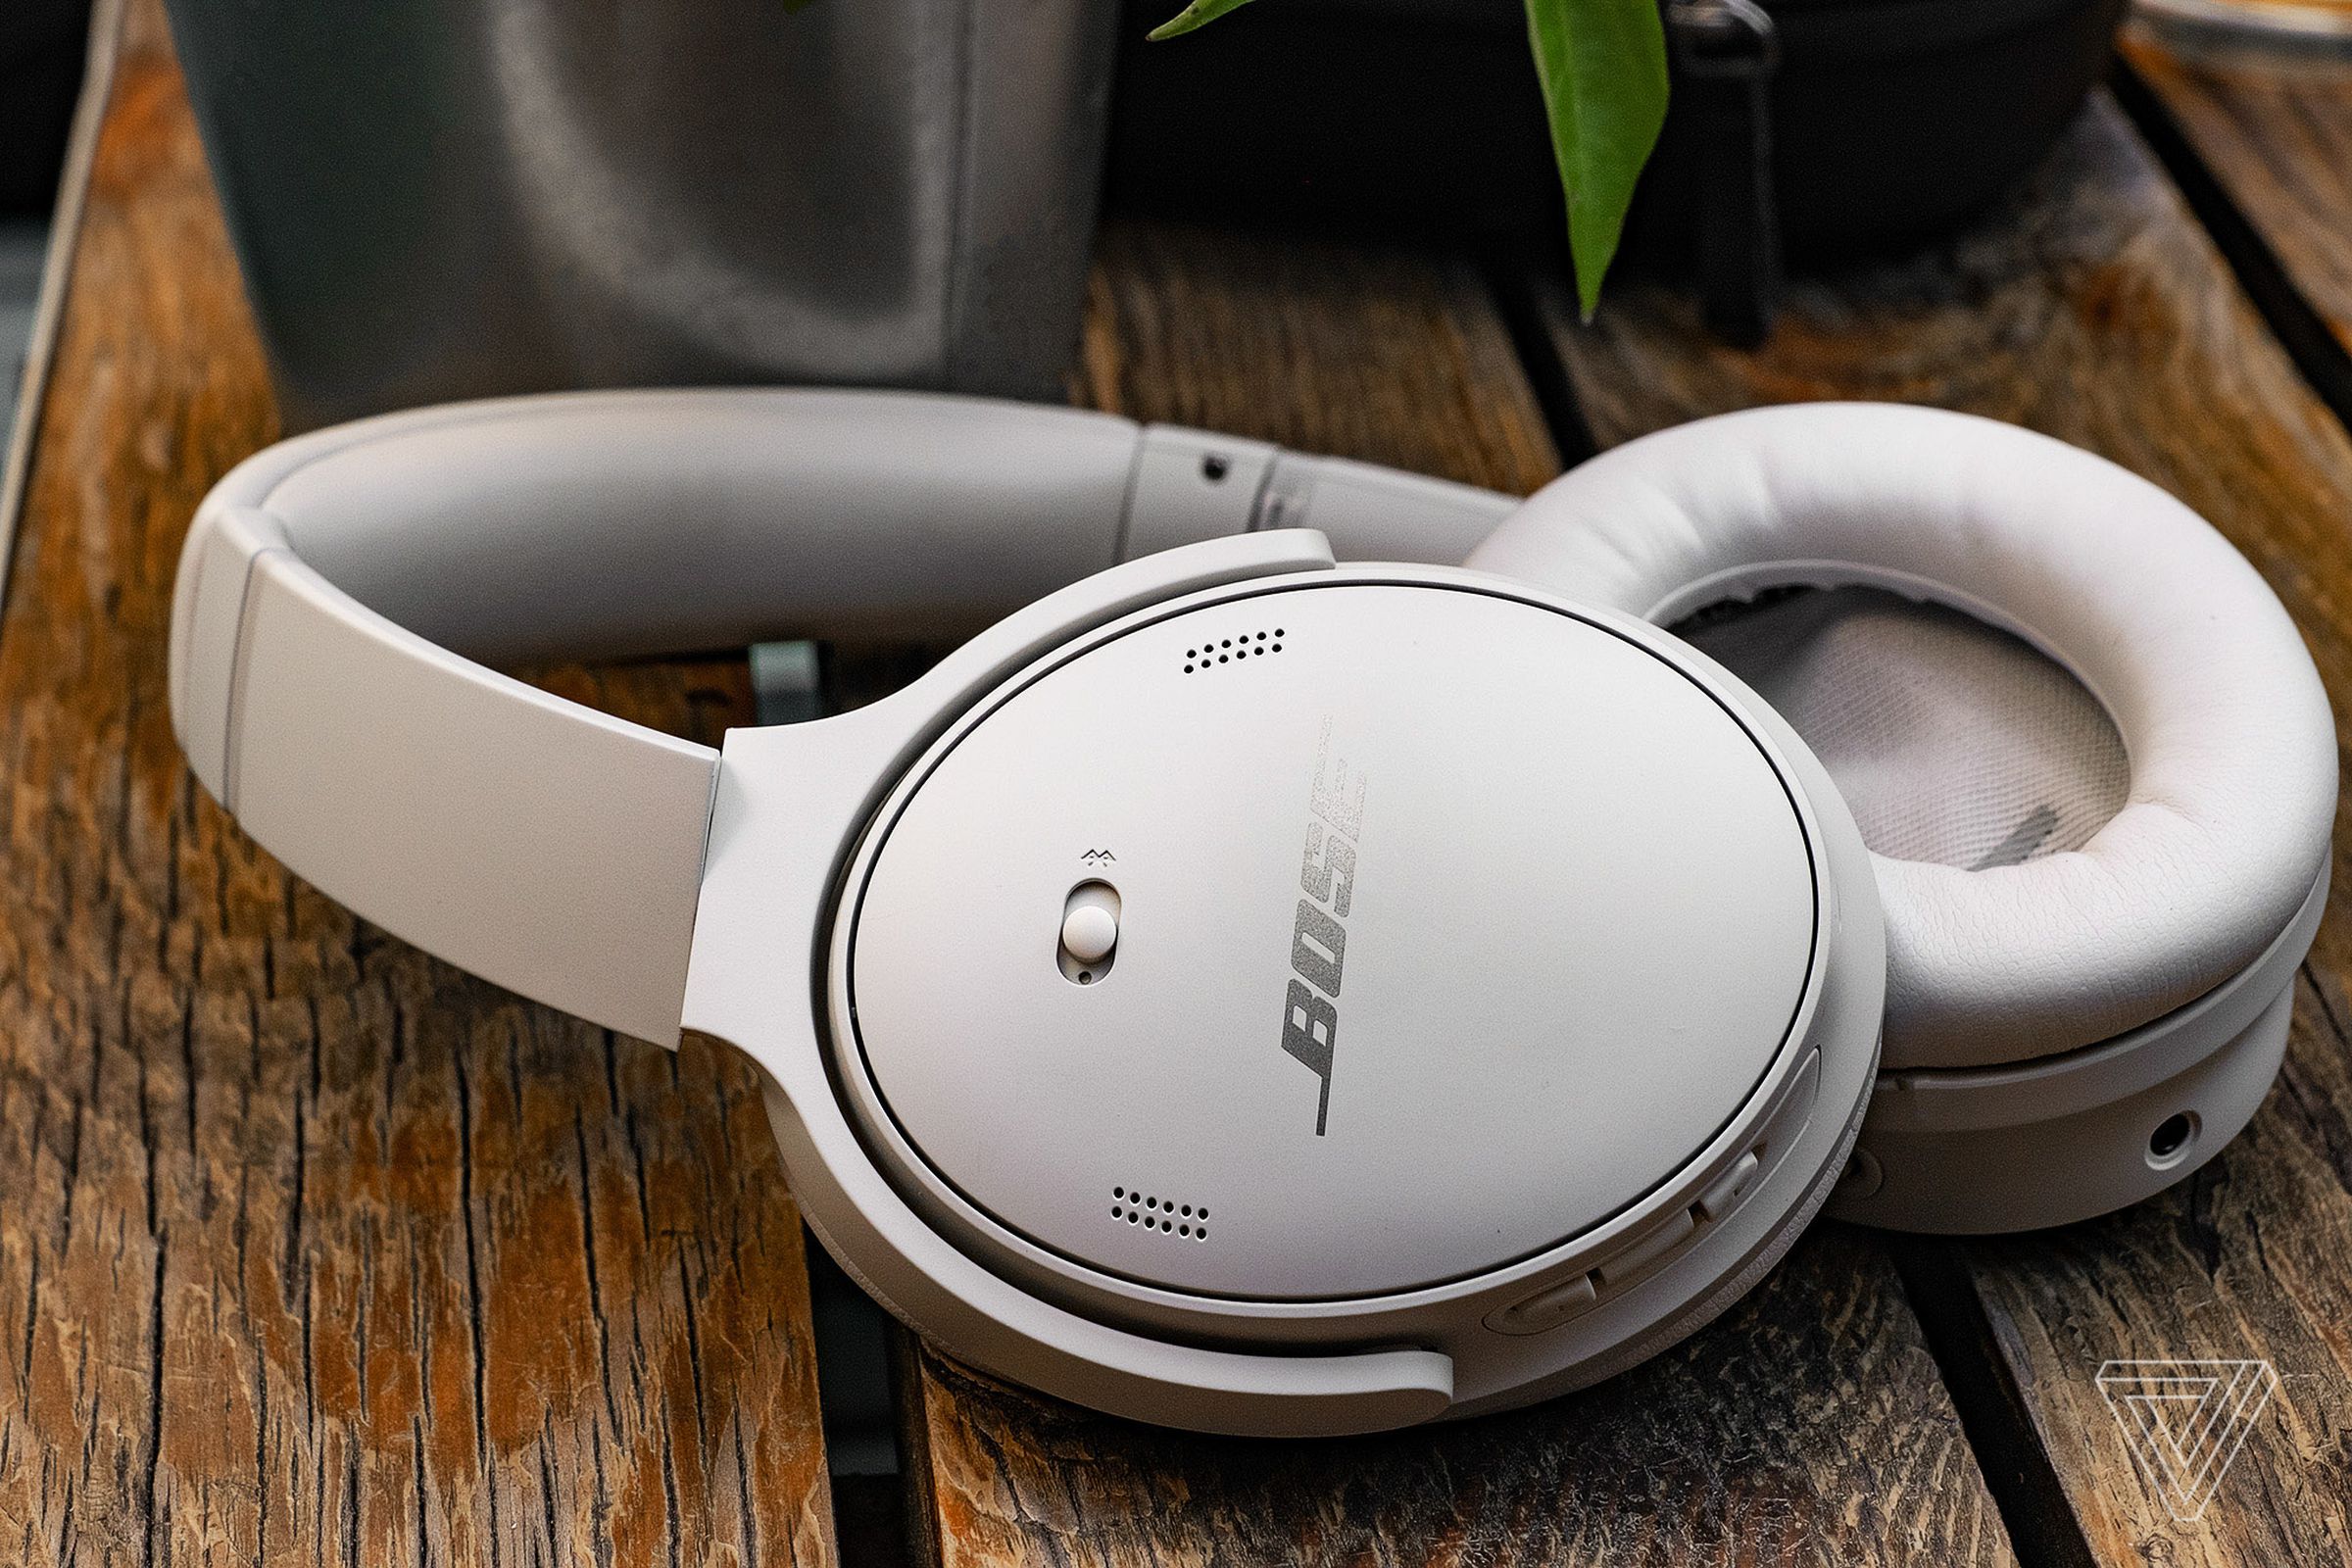 Bose’s QuietComfort 45 are the most comfortable noise-canceling headphones and are currently available at an all-time low.